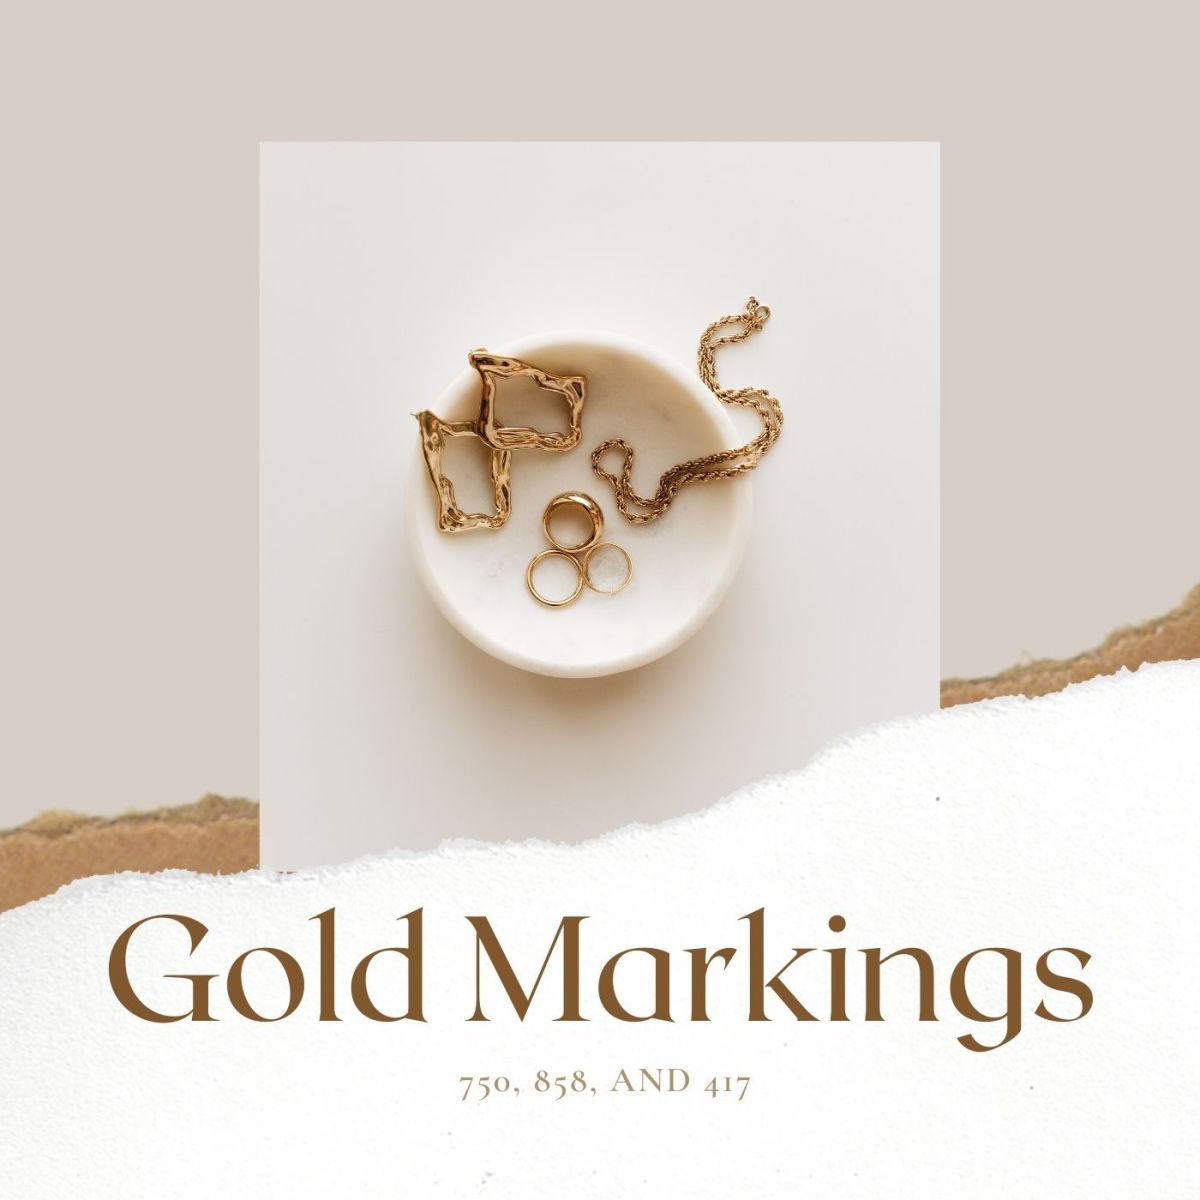 750, 585, and 417 Gold Markings on Jewelry and What They Mean